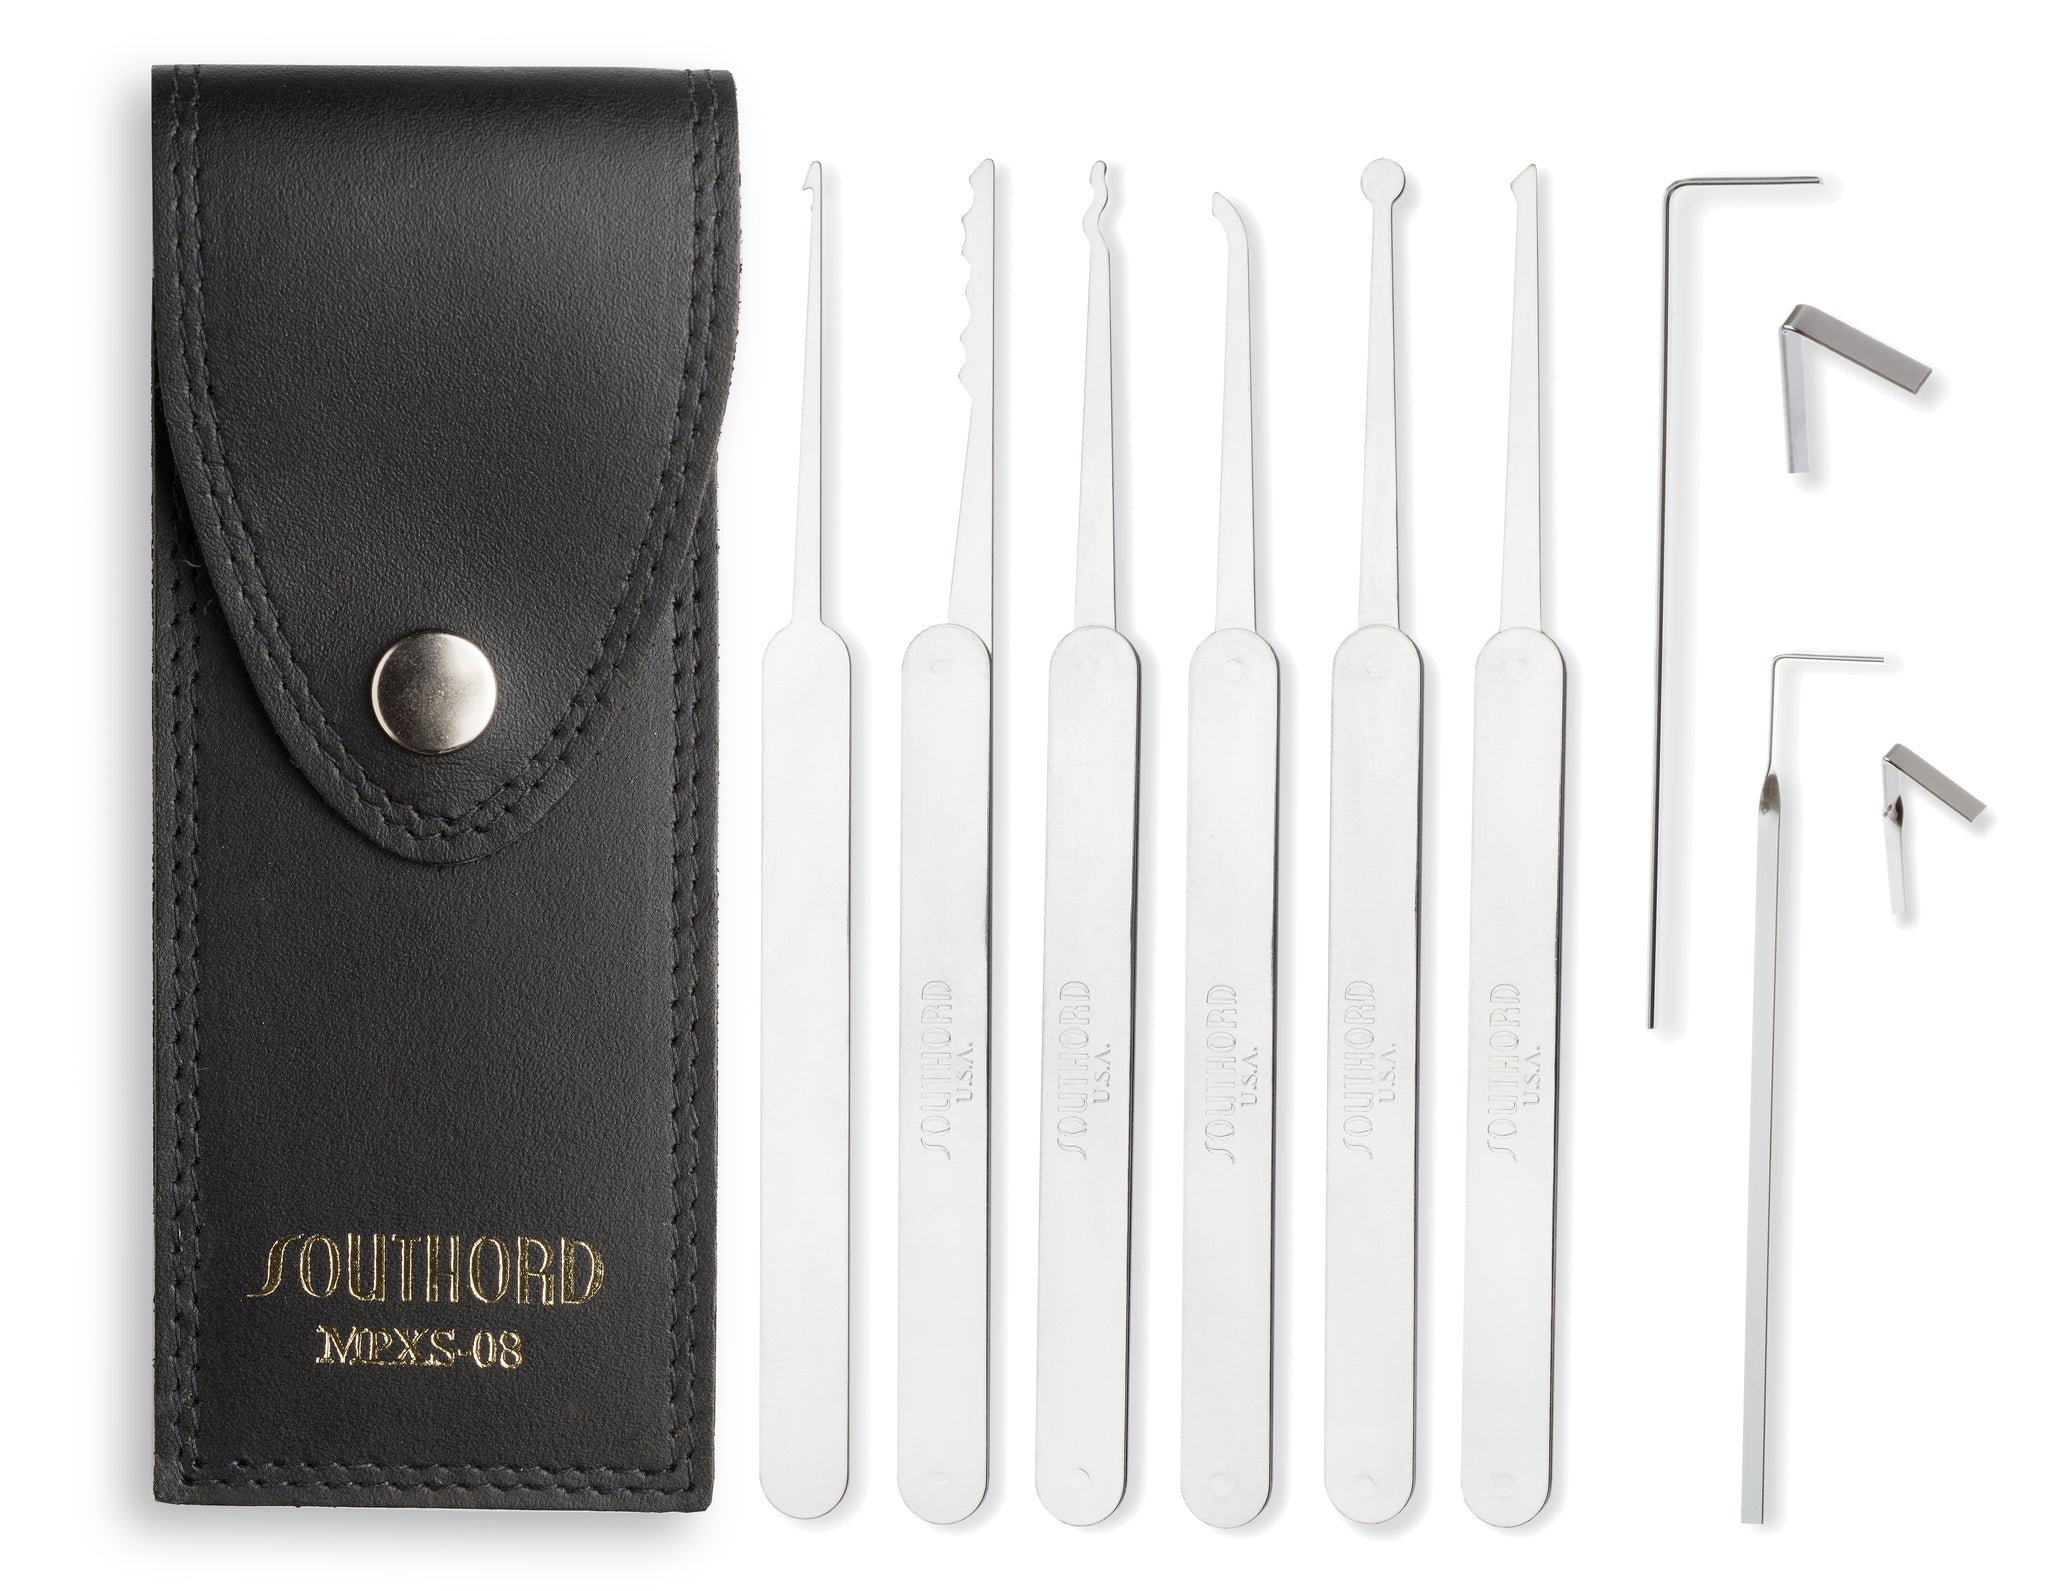 Eight-Piece Lock Pick Set with Metal Handles - MPXS-08